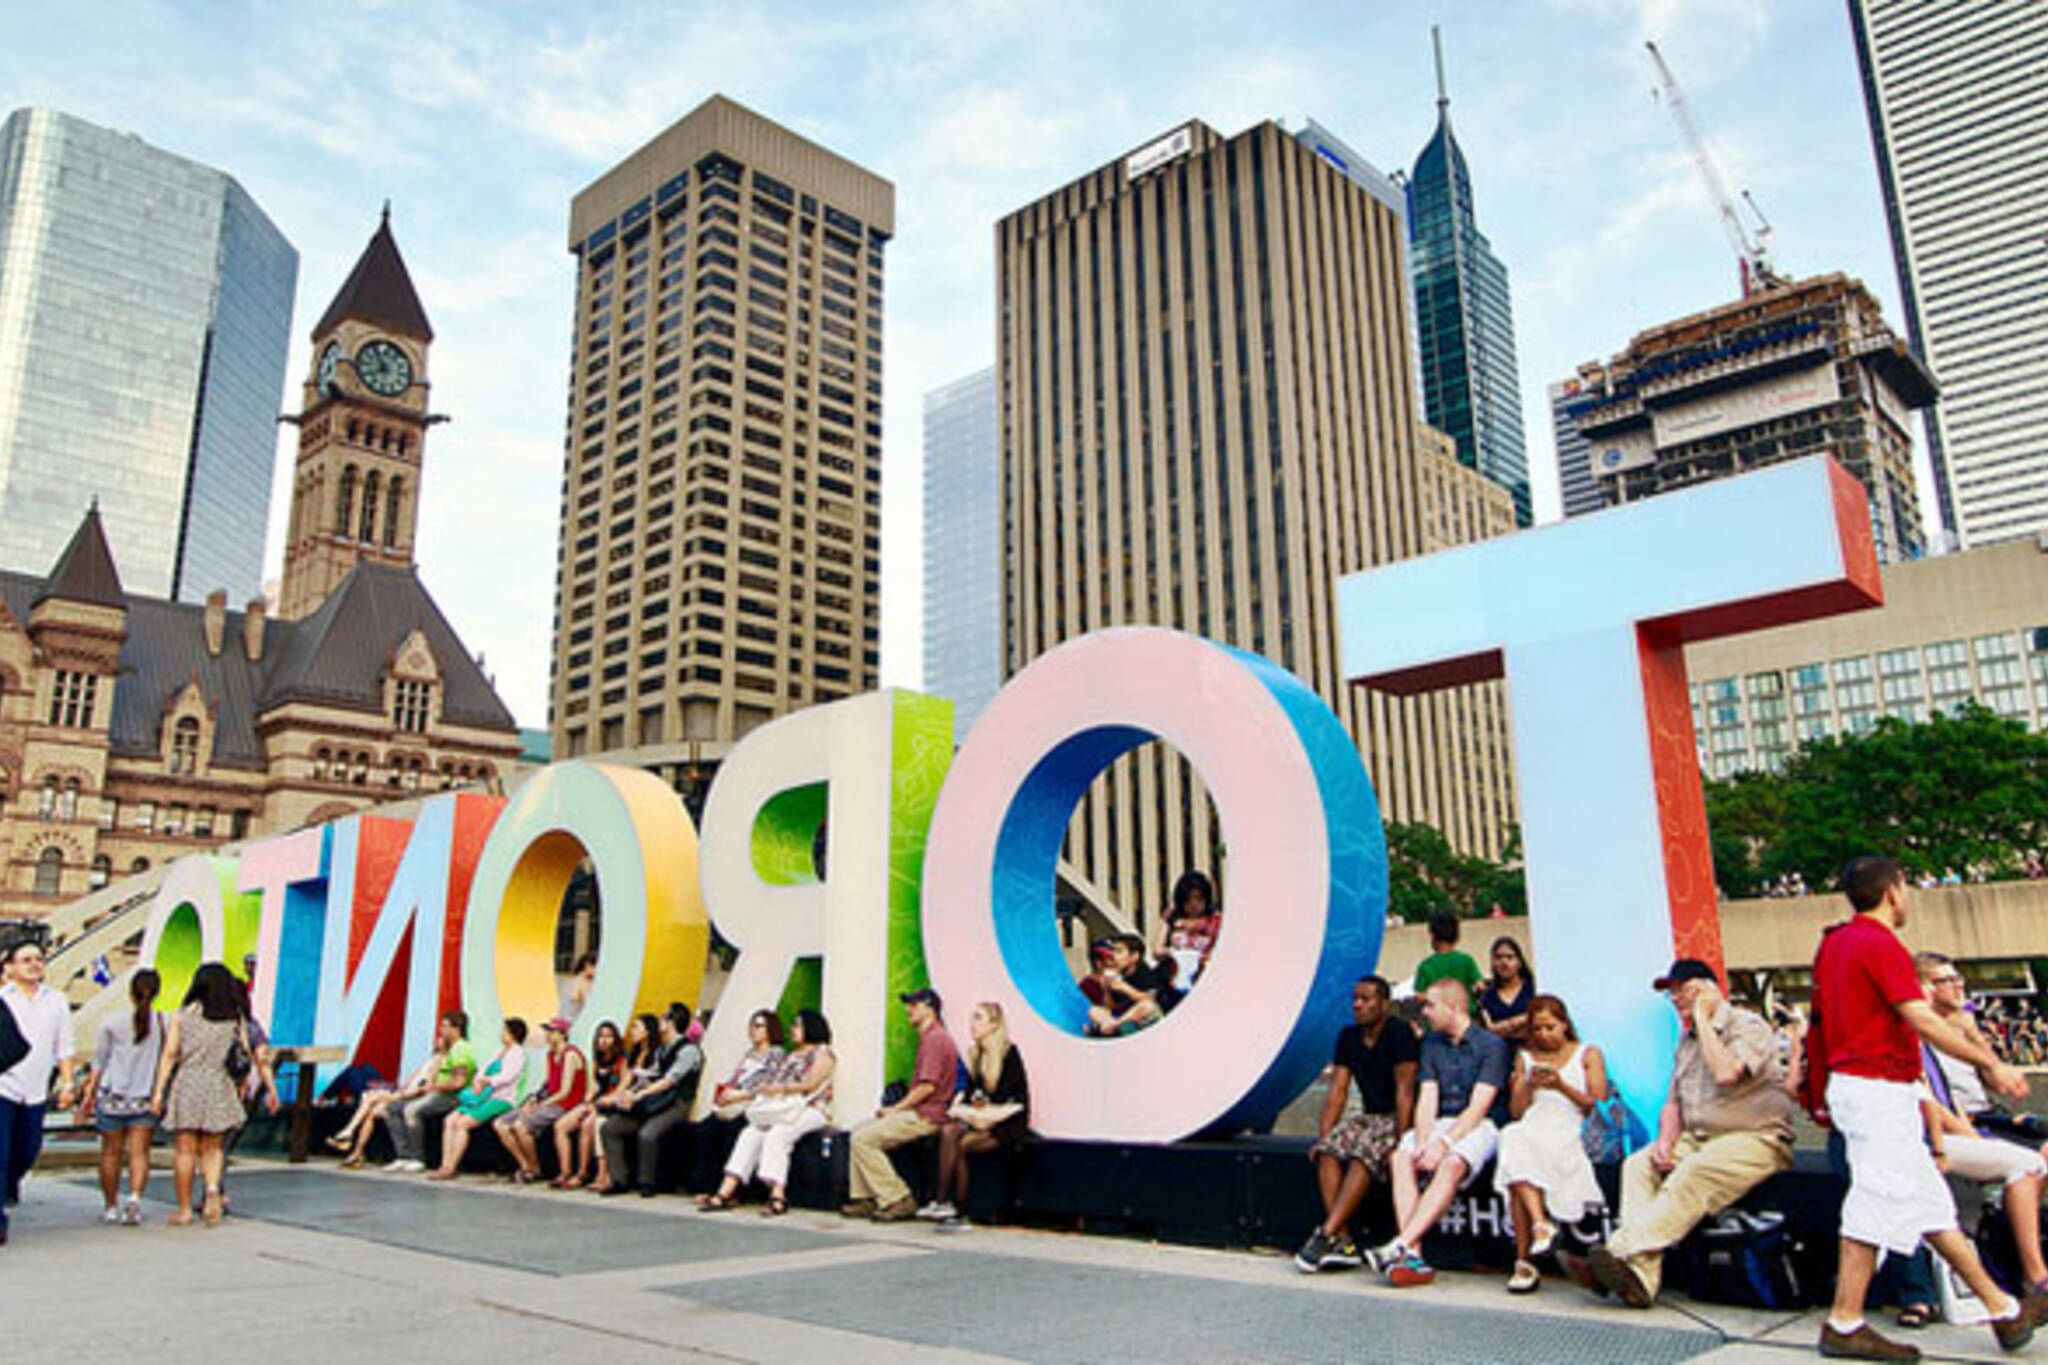 Toronto has one month to decide on 2024 Olympic bid